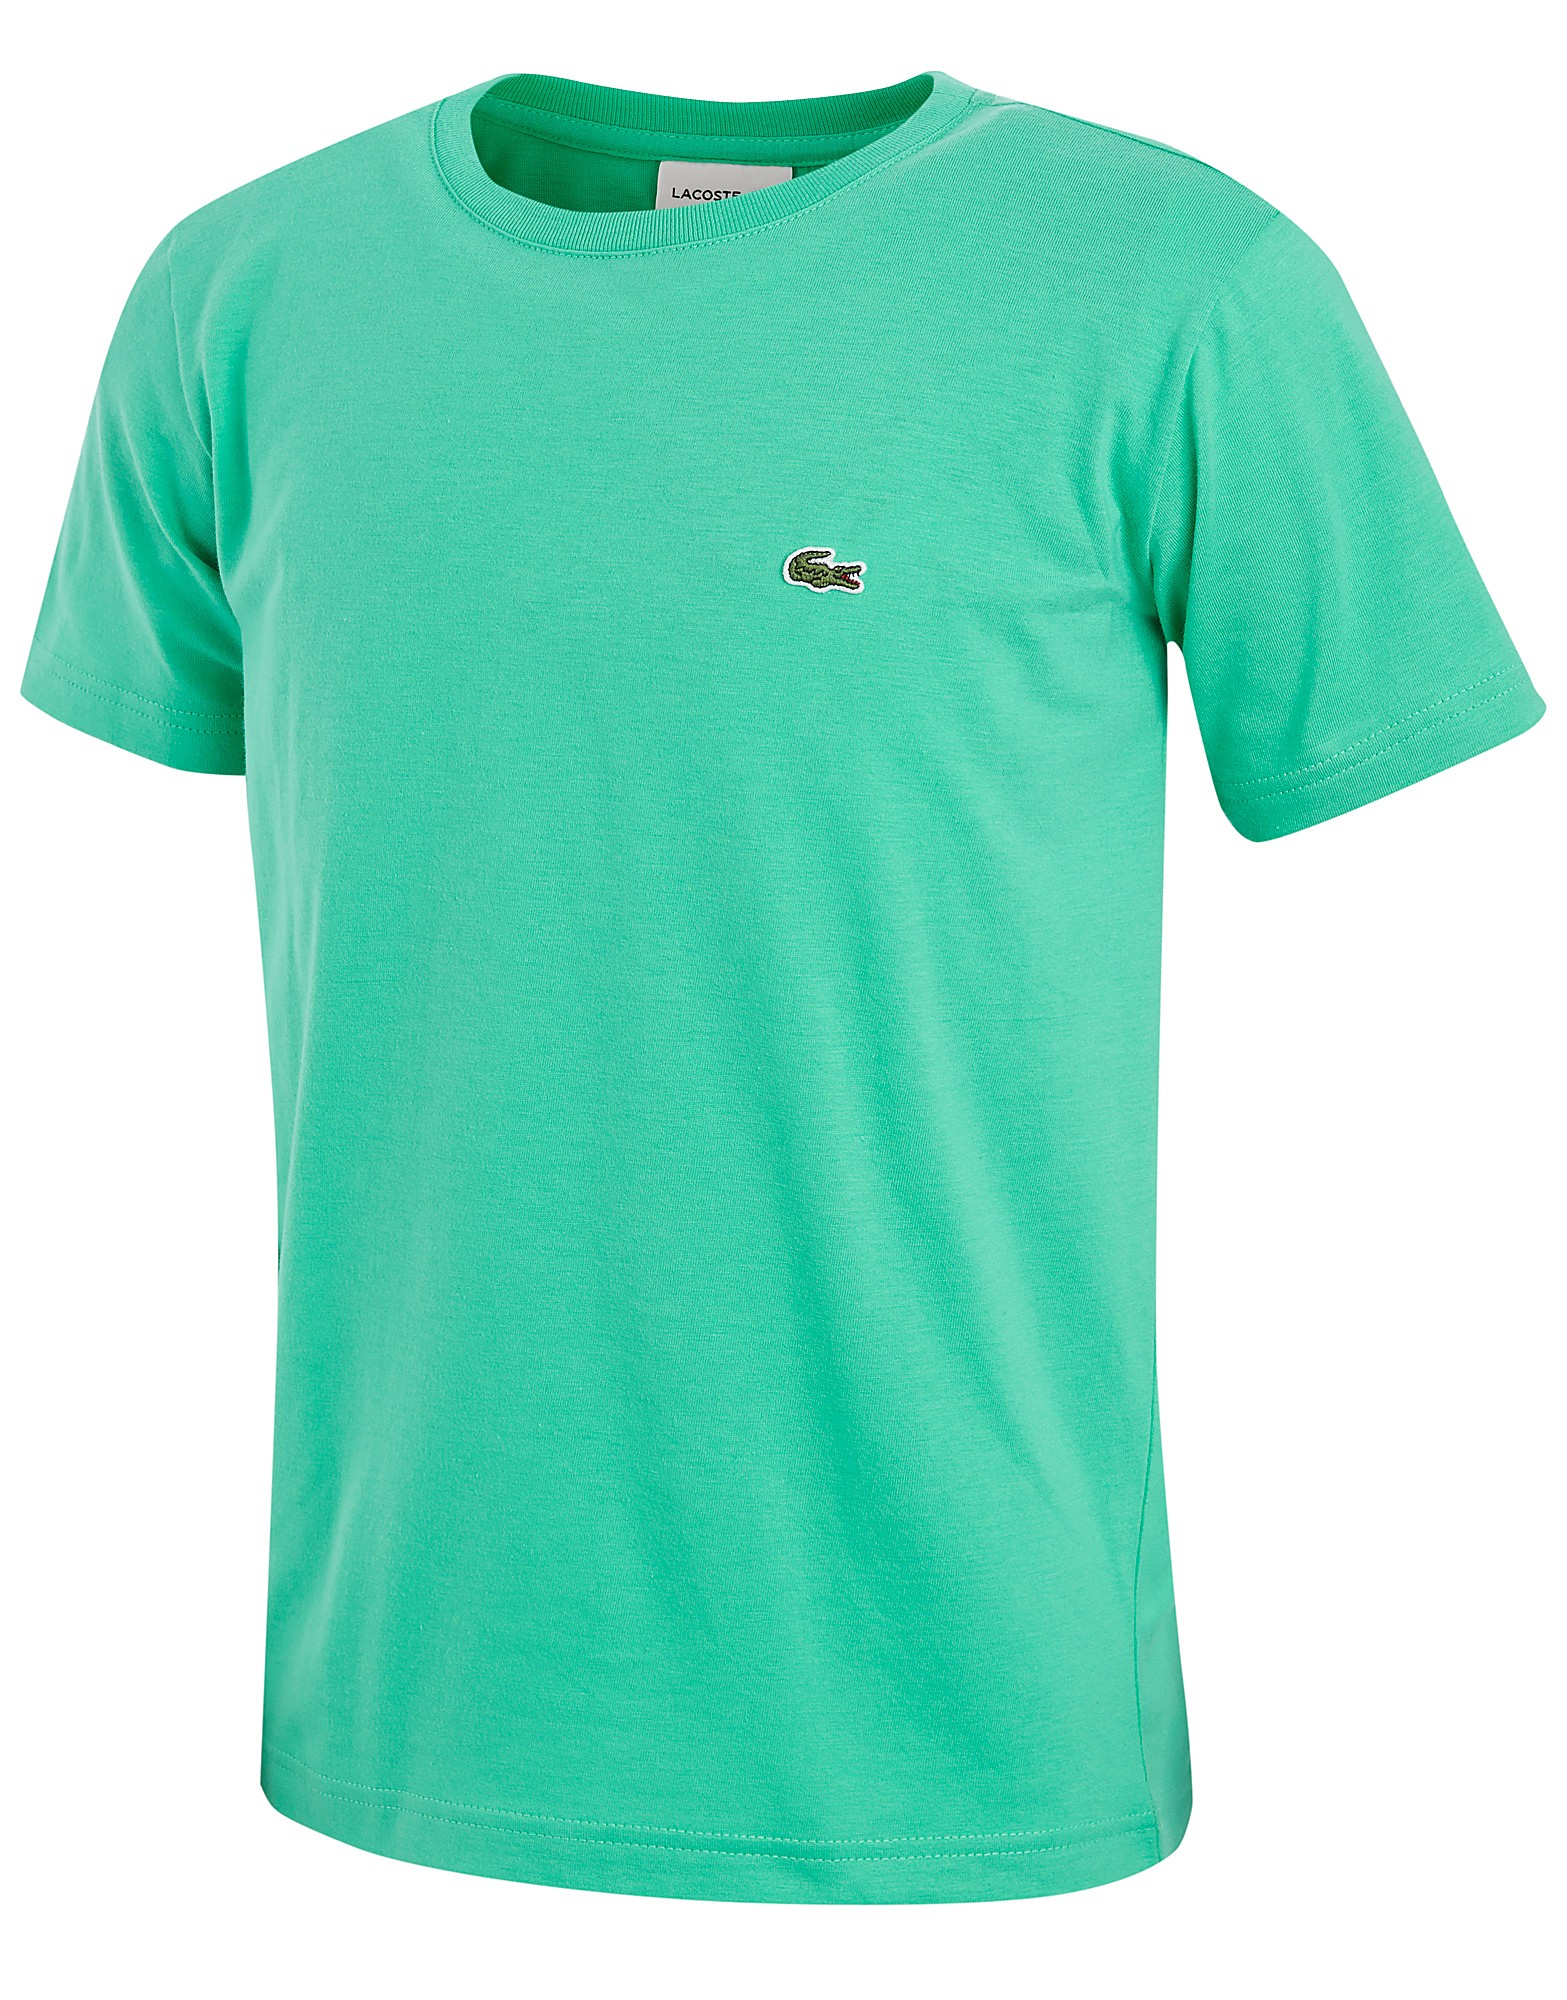 Lacoste Small Logo T-Shirt Junior - review, compare prices, buy online